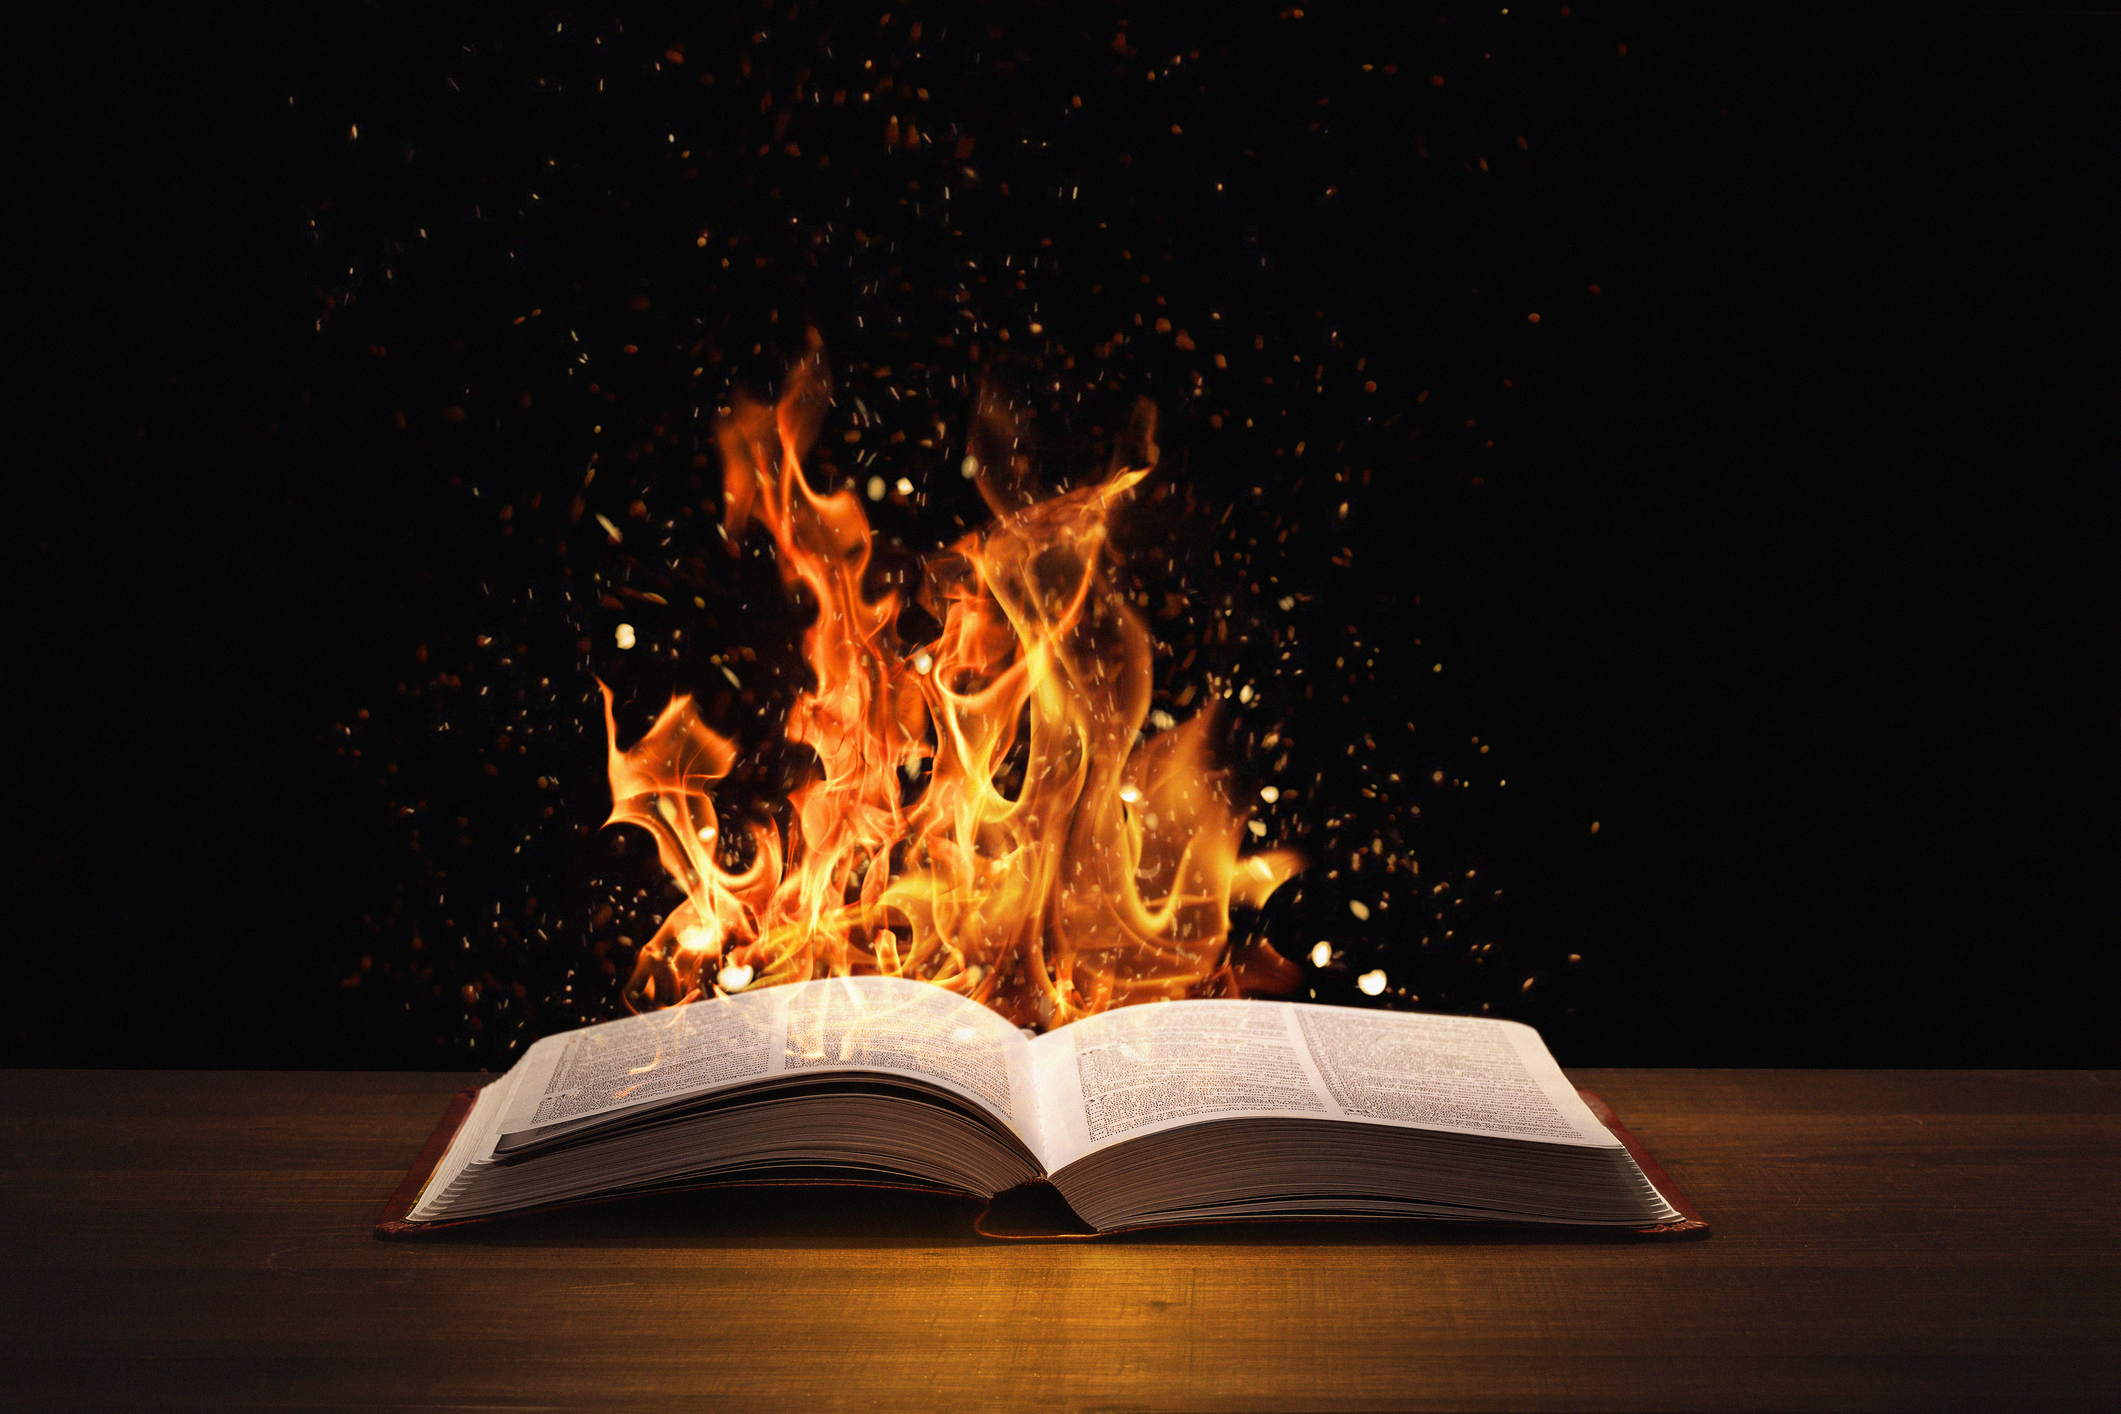 Holy Bible on fire on a wooded desk